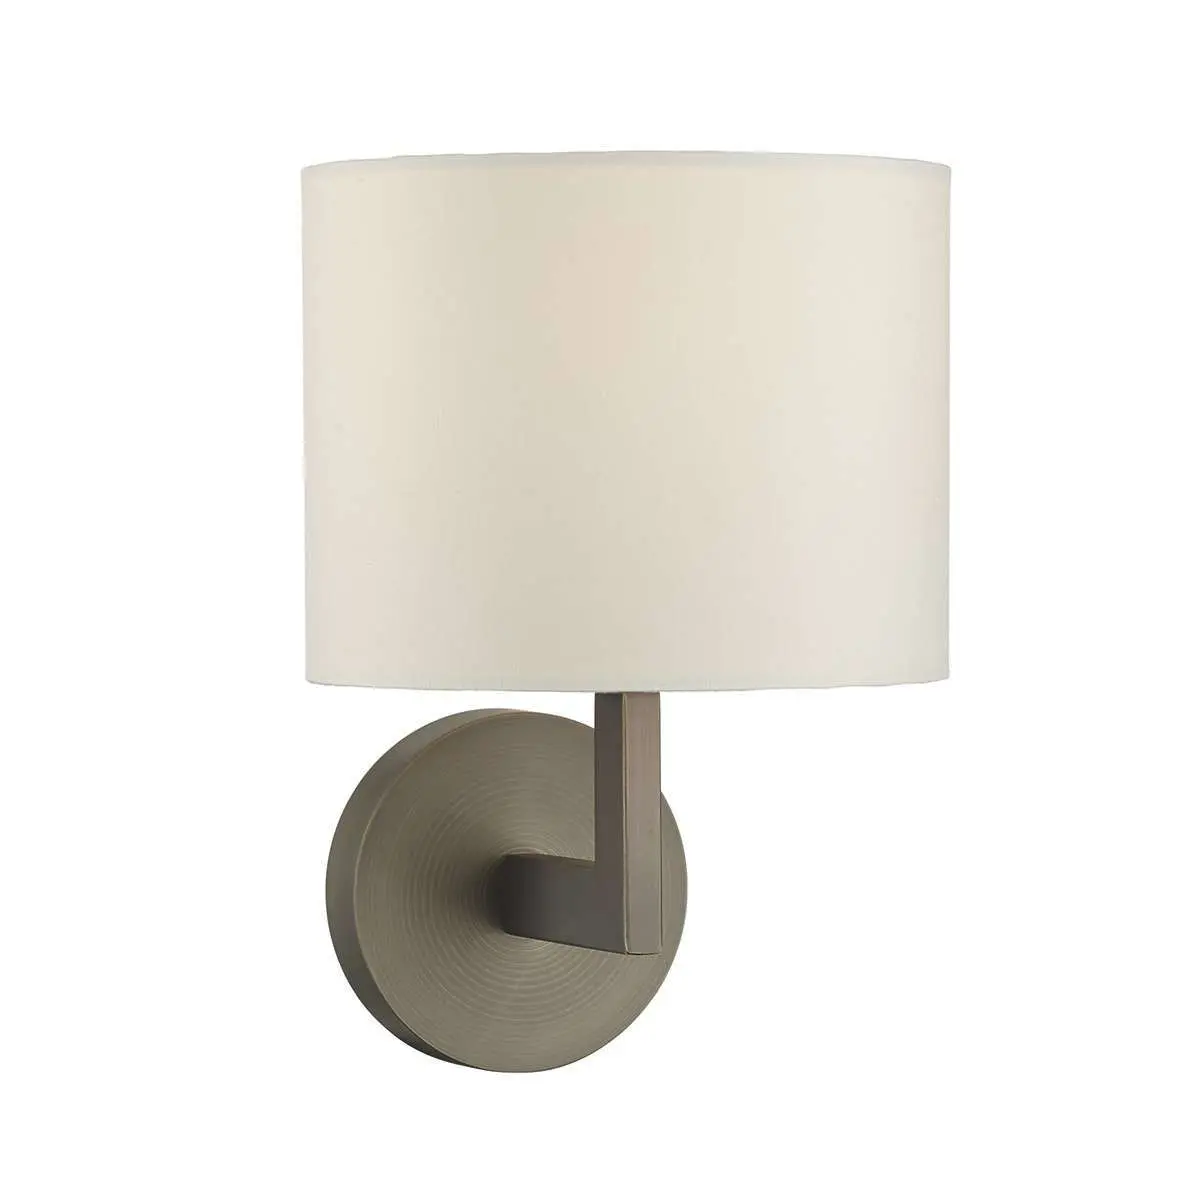 Ferrara Wall Bracket Round With Square Arm Bronze Base Only